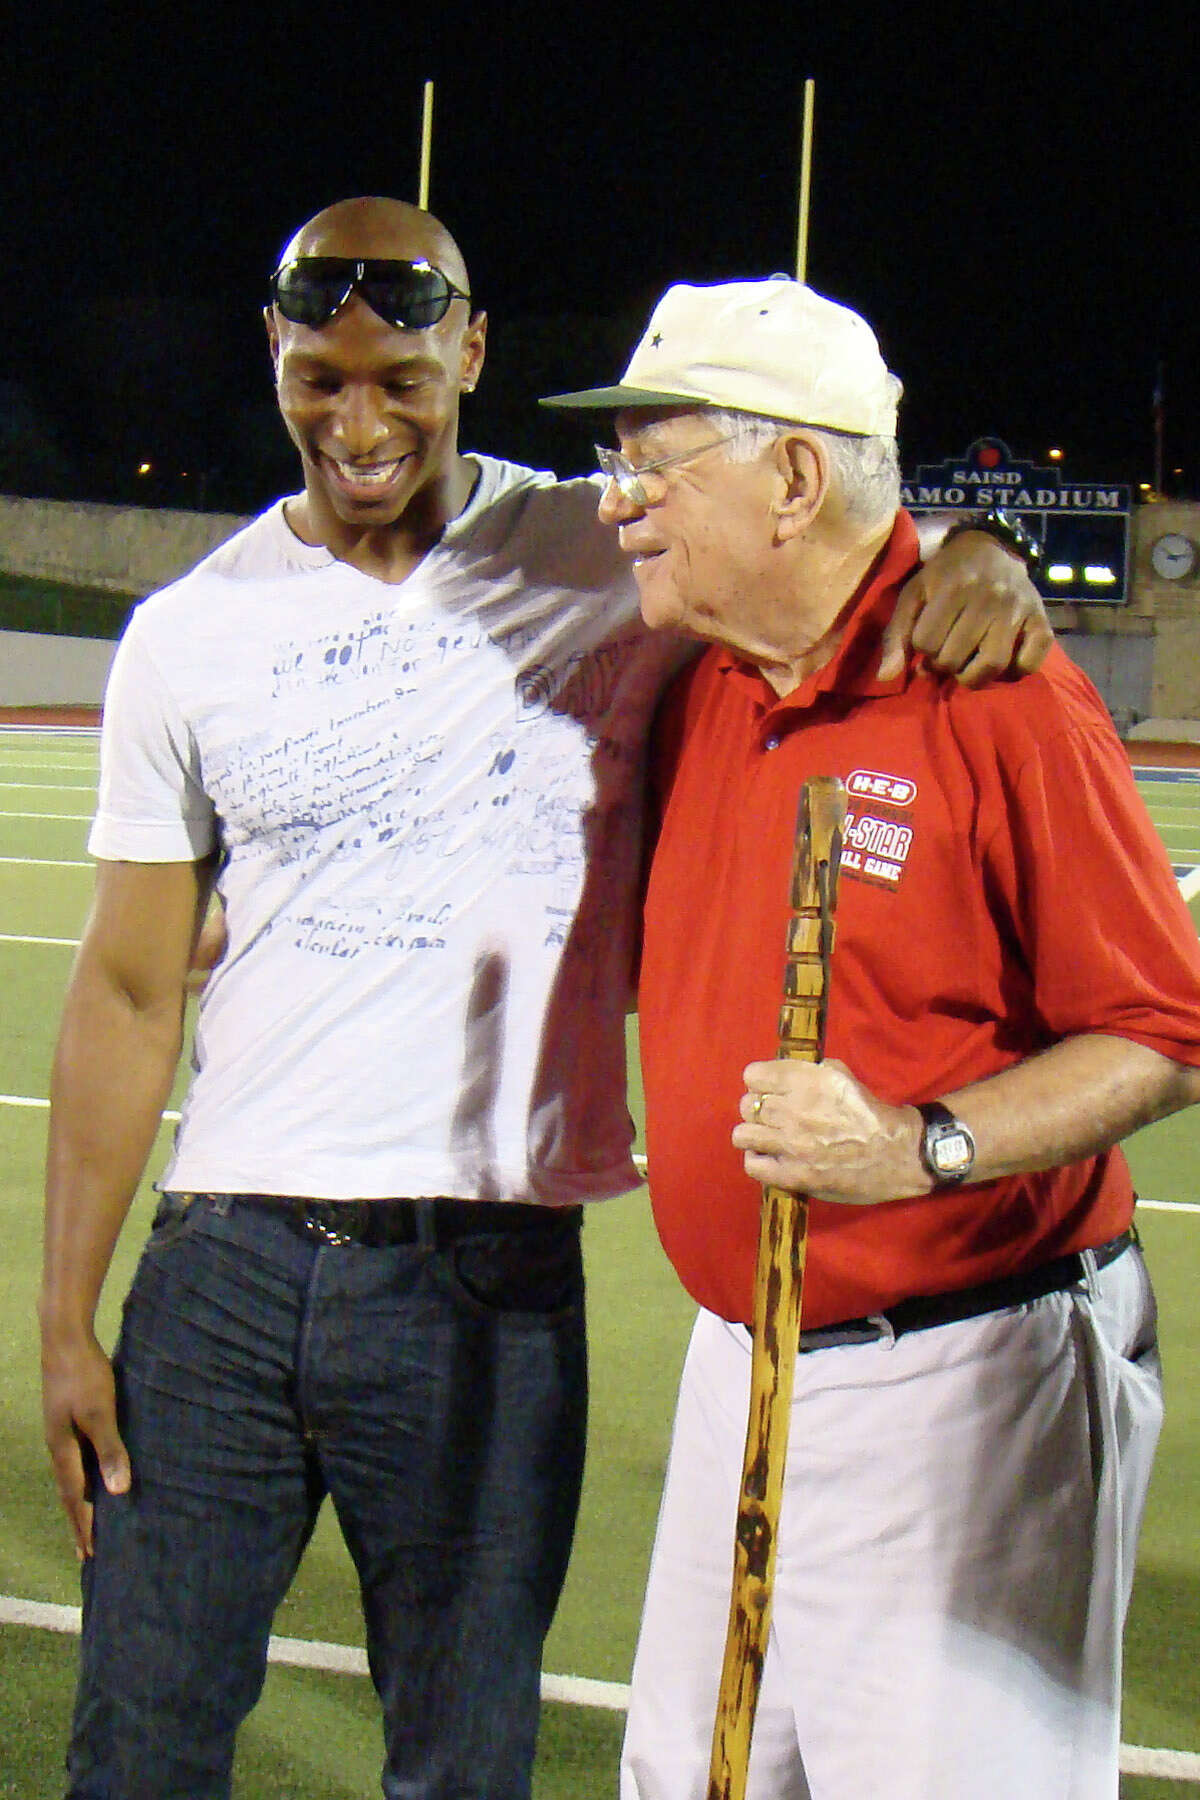 Dallas Cowboys wide receiver Sam Hurd embraces coach George Pasterchick at 2010 H-E-B San Antonio High School All-Star Football Game on May 17, 2010. Hurd played for Pasterchick in this game in 2002.